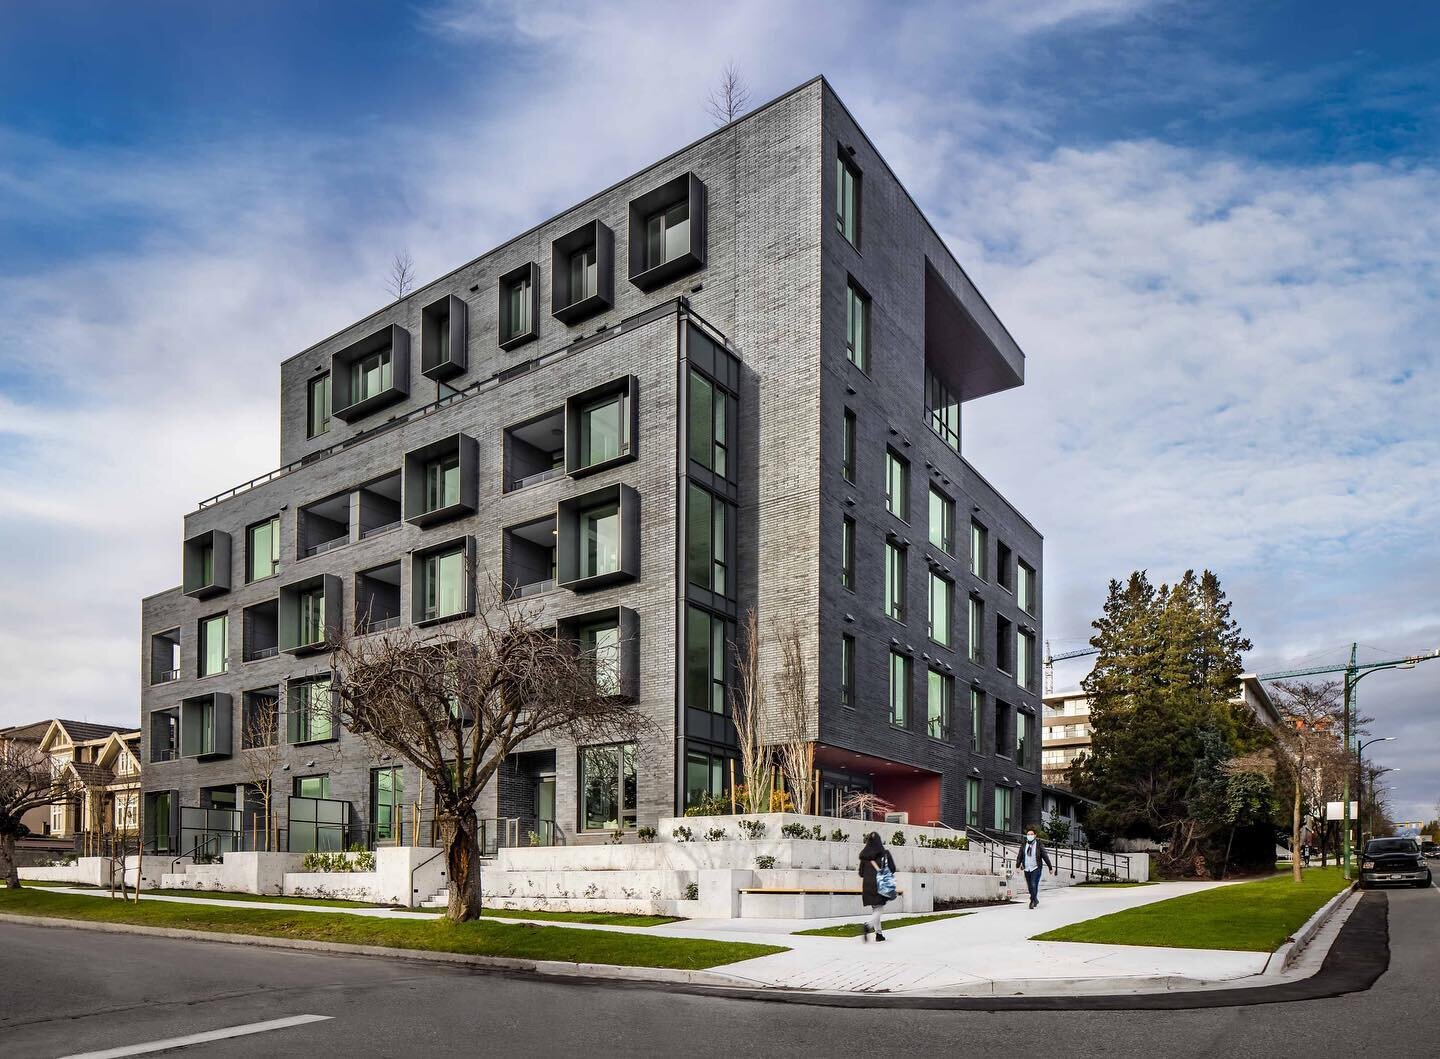 GBL Architects @gbl_arch recently completed the multifamily residential development SOMA on Cambie located in Vancouver, British Columbia. The 28,000 sq ft development aligns with the City of Vancouver&rsquo;s overarching plan for higher density land